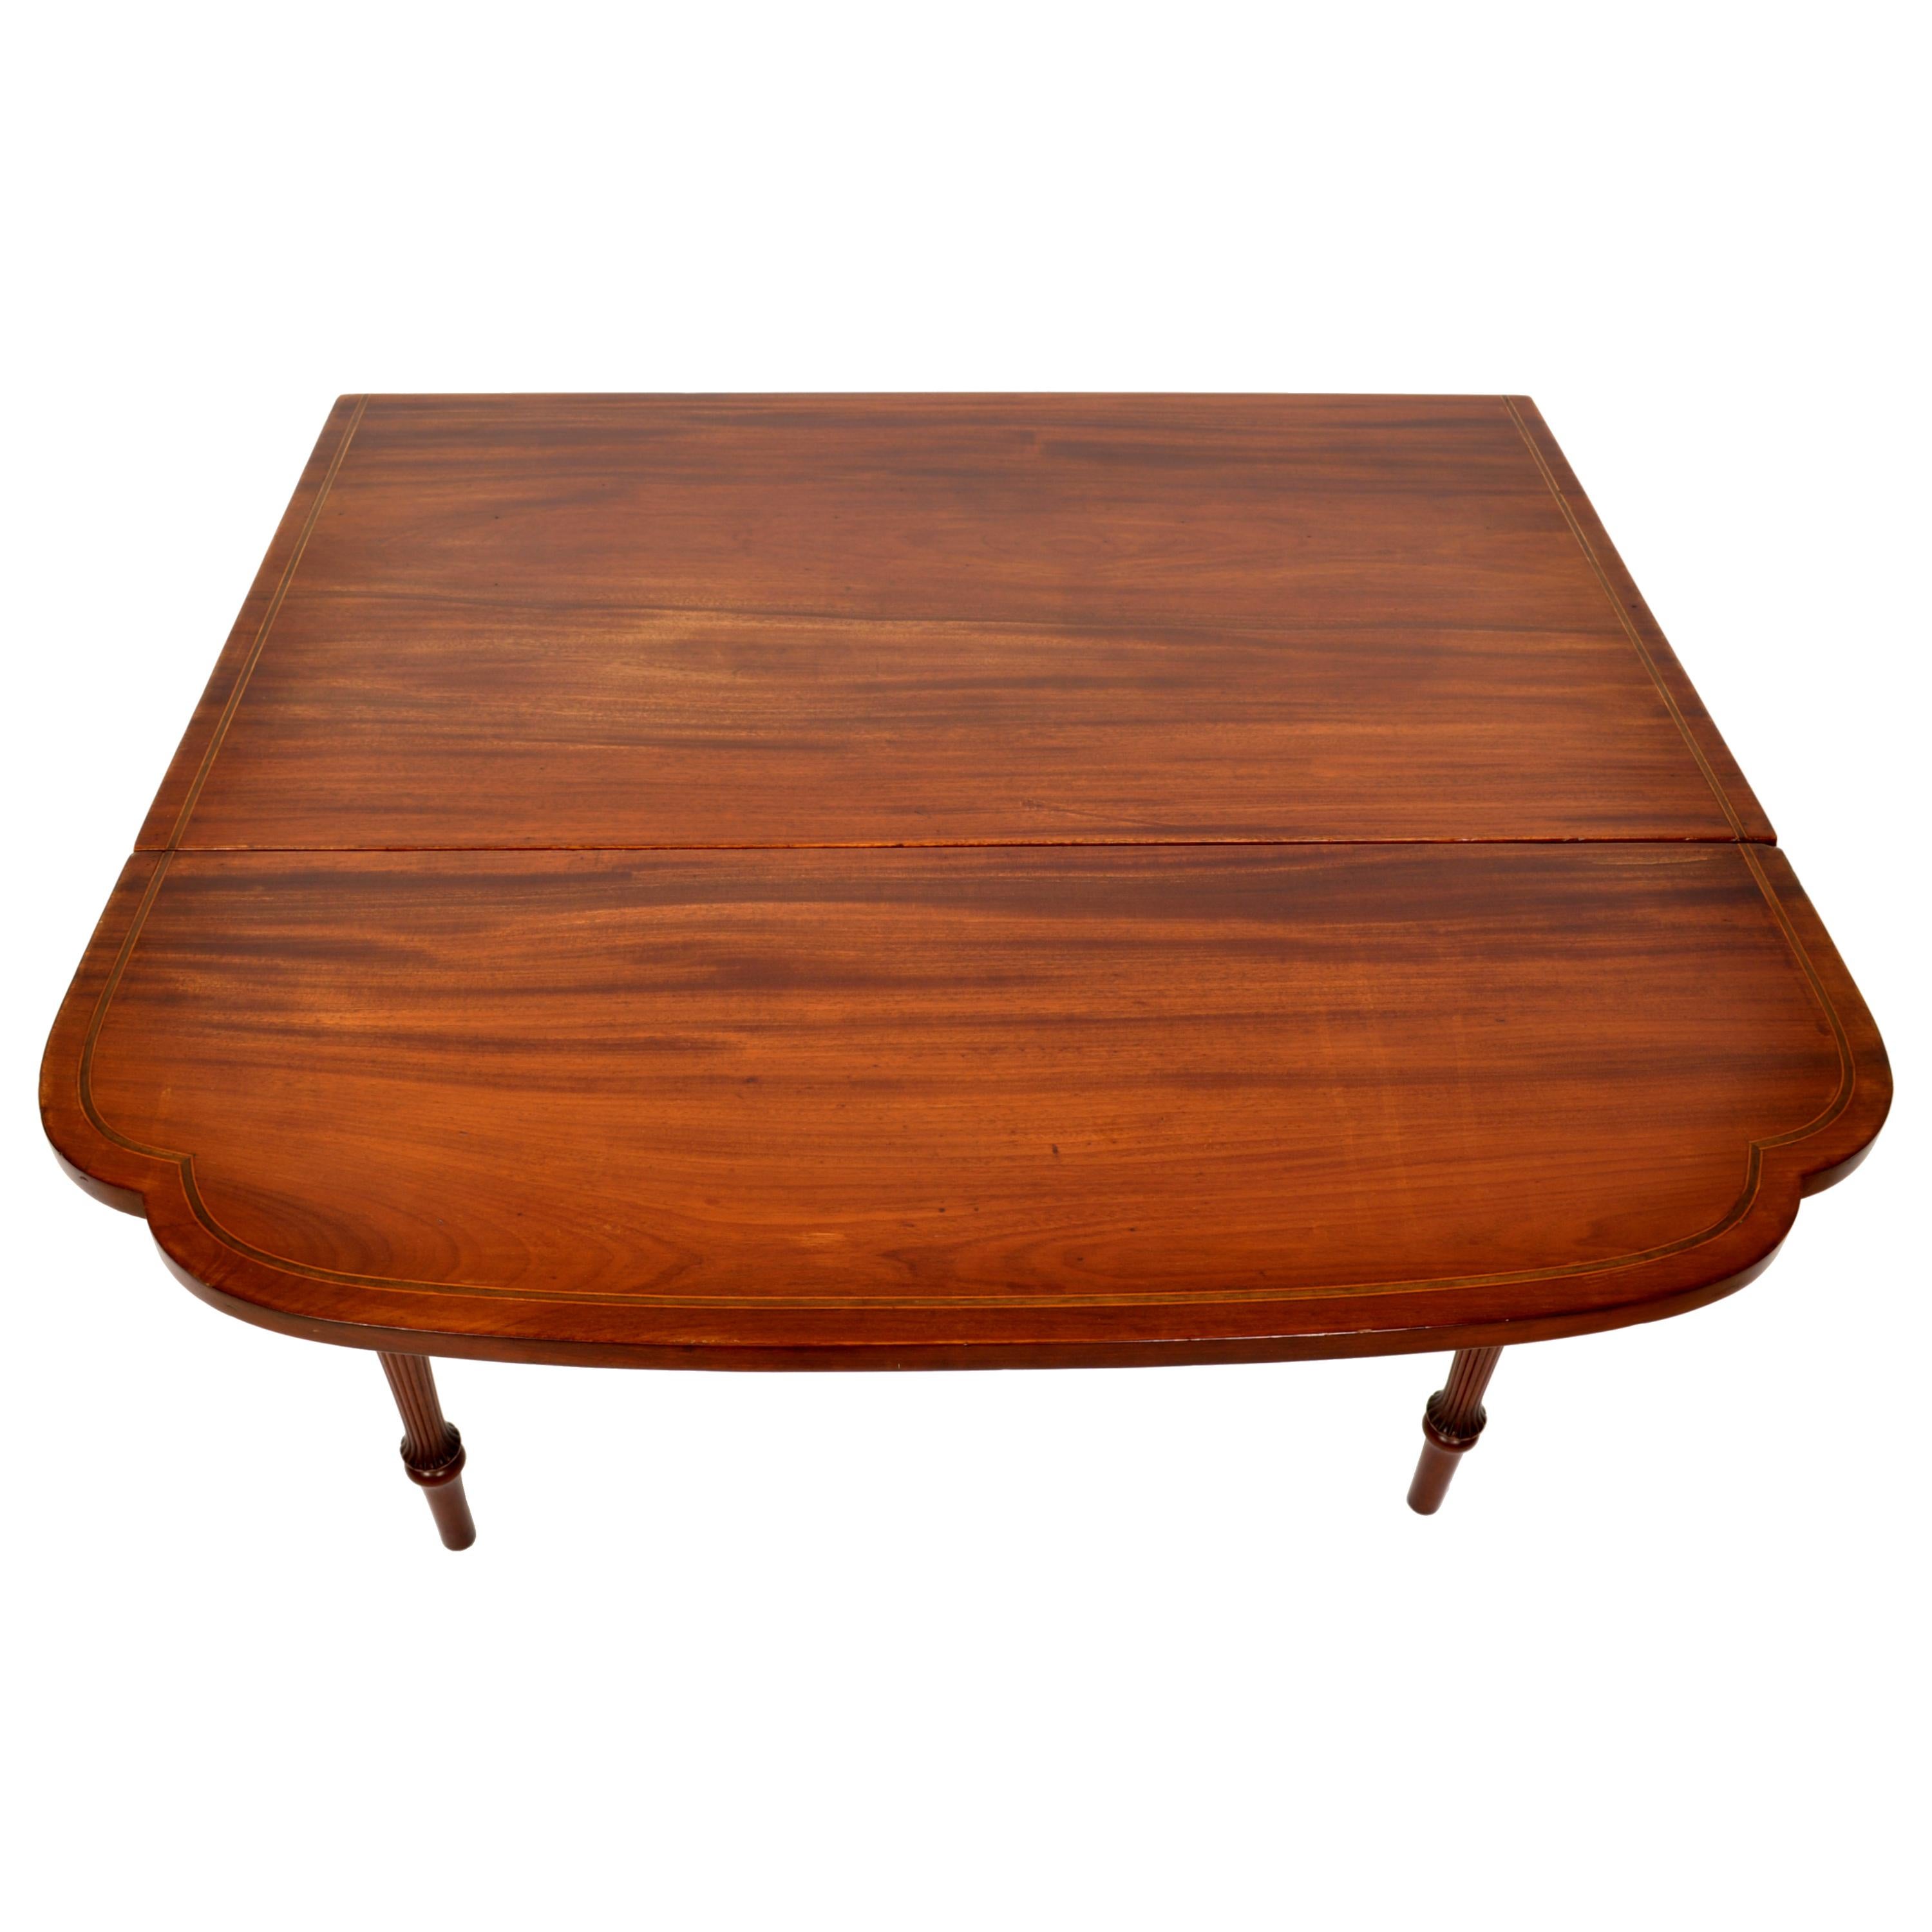 Antique American Federal Sheraton Inlaid Mahogany Pembroke Table New York 1790 For Sale 3